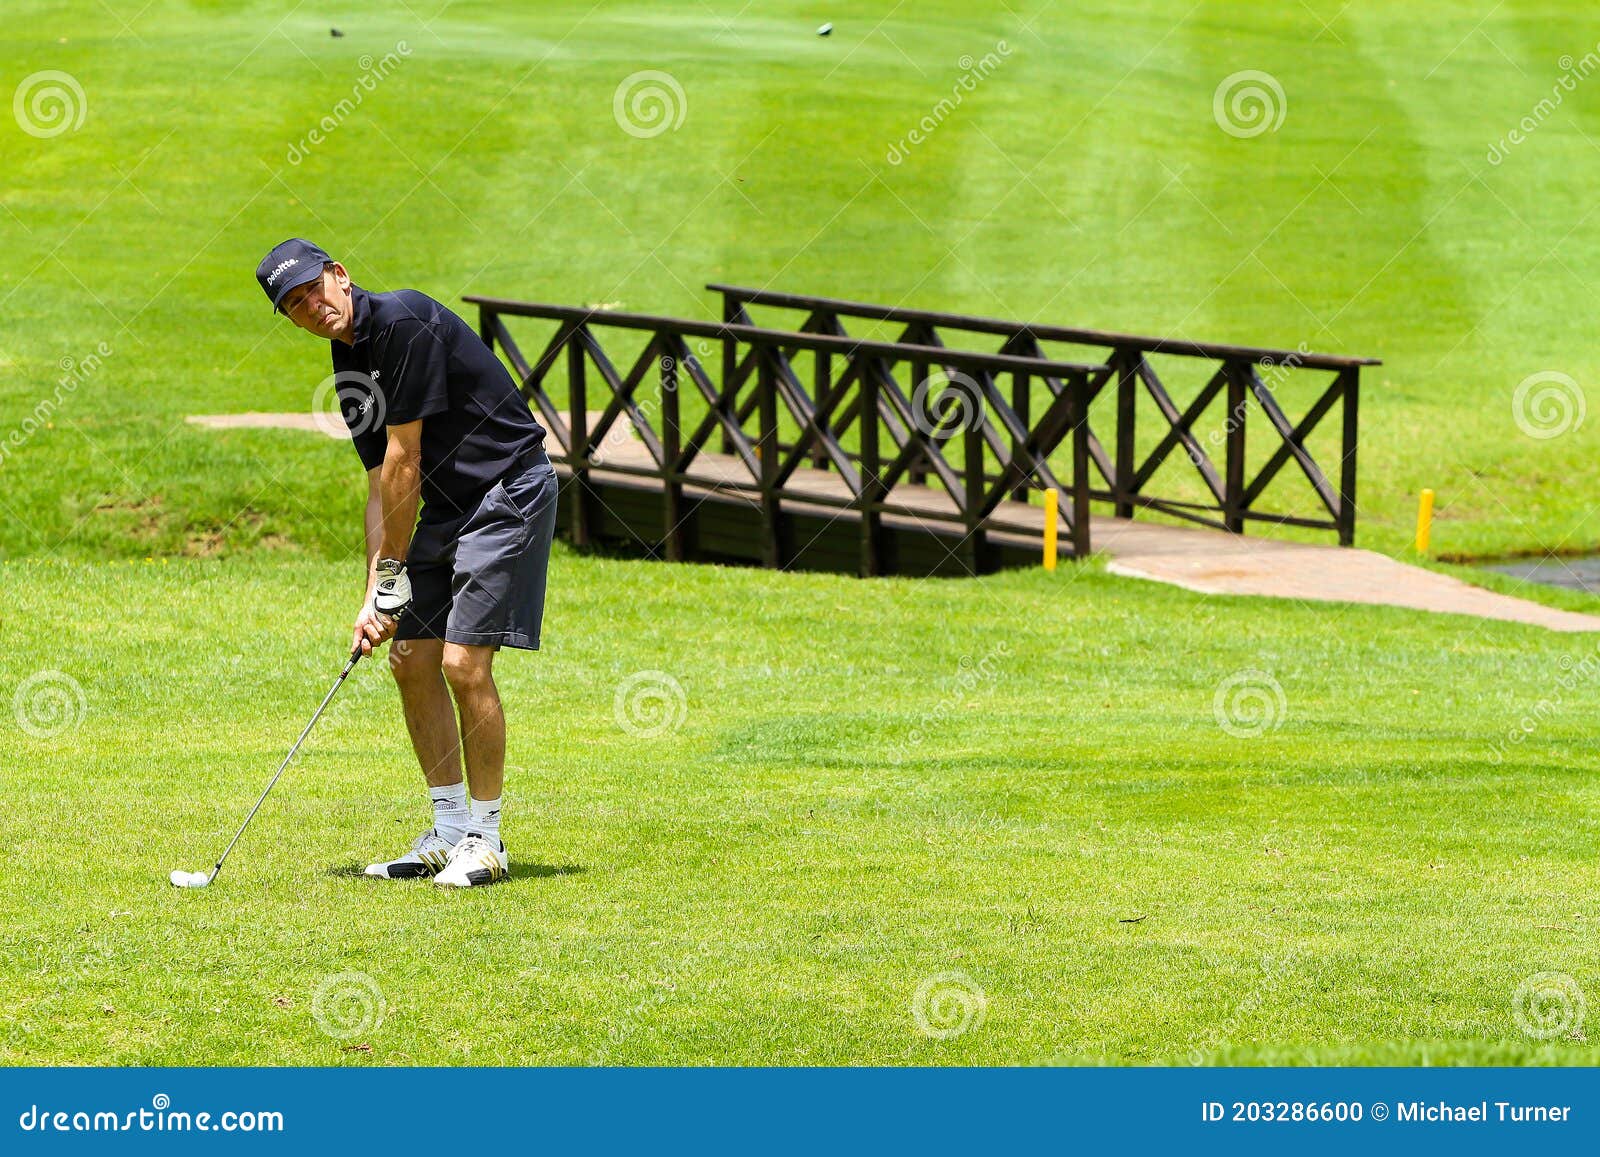 Amateur Golfers Playing a Round of Golf As a Recreational Pursuit ...